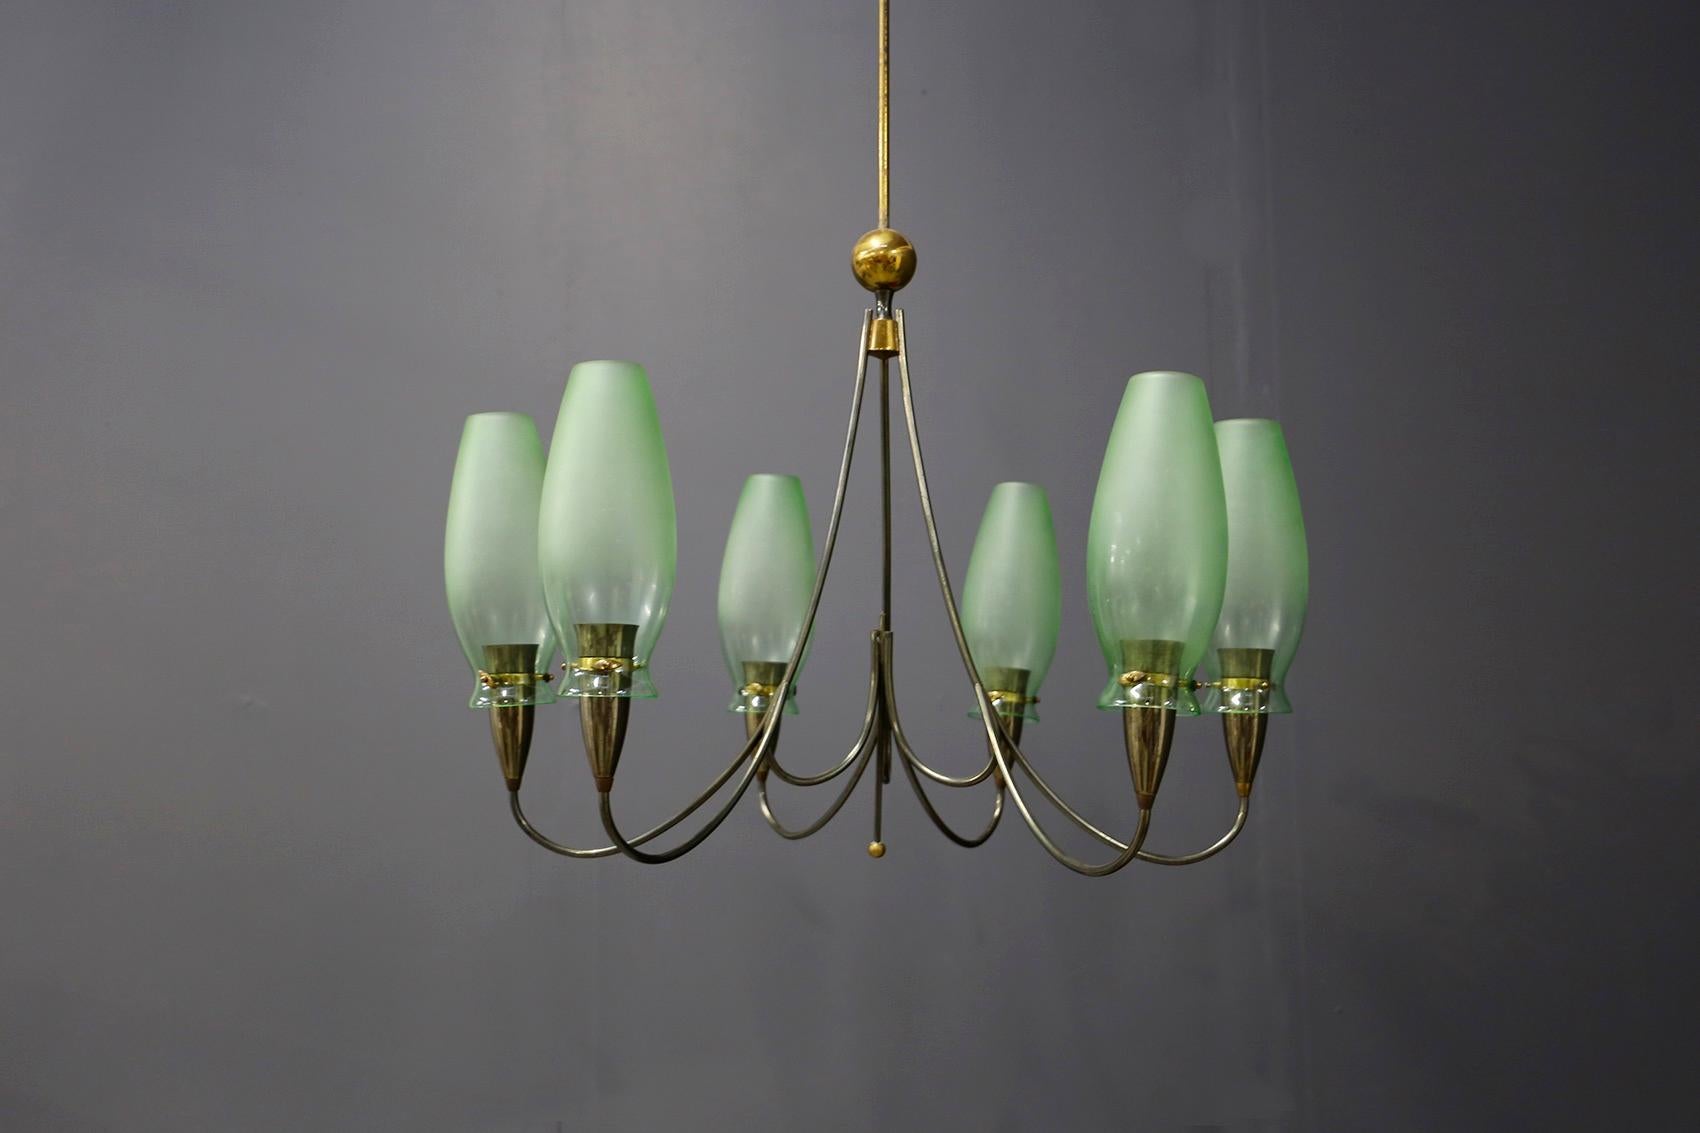 Elegant Italian-made chandelier of 1950. The chandelier has a structure in brass and nickel-plated brass tubing. The chandelier has 6 arms that accommodate the six lights. Its bulb holders are made of brass with a semi-circular shape. Each light has